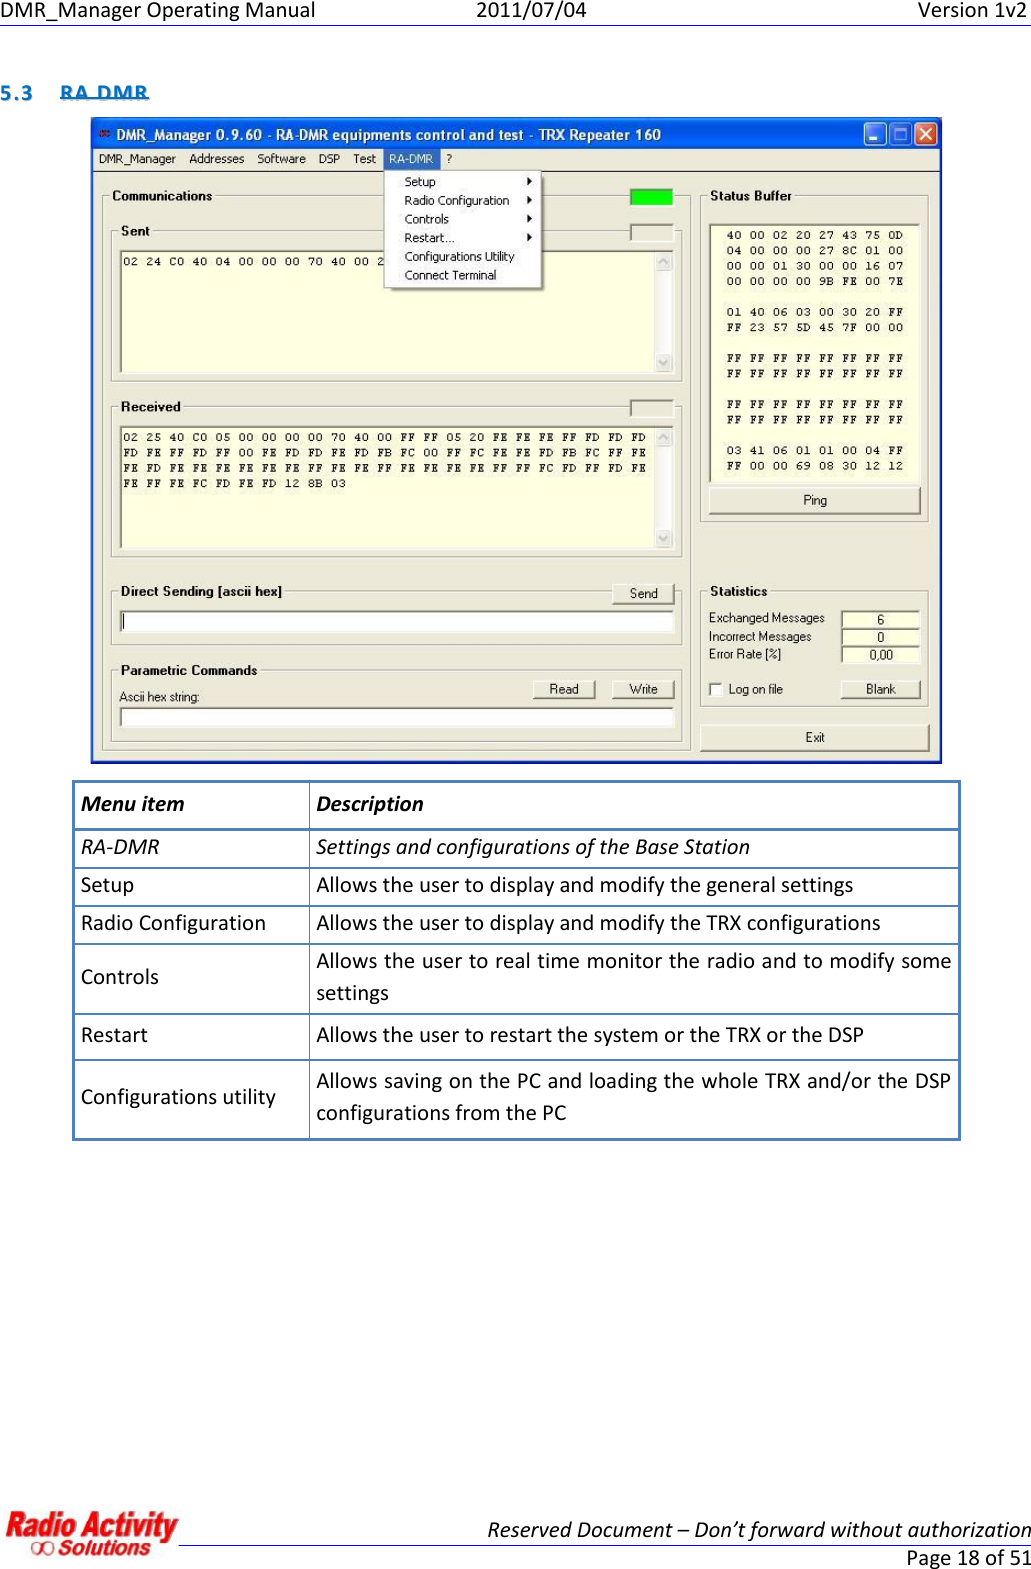 DMR_Manager Operating Manual 2011/07/04 Version 1v2Reserved Document – Don’t forward without authorizationPage 18 of 5155..33RRAADDMMRRMenu itemDescriptionRA-DMRSettings and configurations of the Base StationSetupAllows the user to display and modify the general settingsRadio ConfigurationAllows the user to display and modify the TRX configurationsControlsAllows the user to real time monitor the radio and to modify somesettingsRestartAllows the user to restart the system or the TRX or the DSPConfigurations utilityAllows saving on the PC and loading the whole TRX and/or the DSPconfigurations from the PC